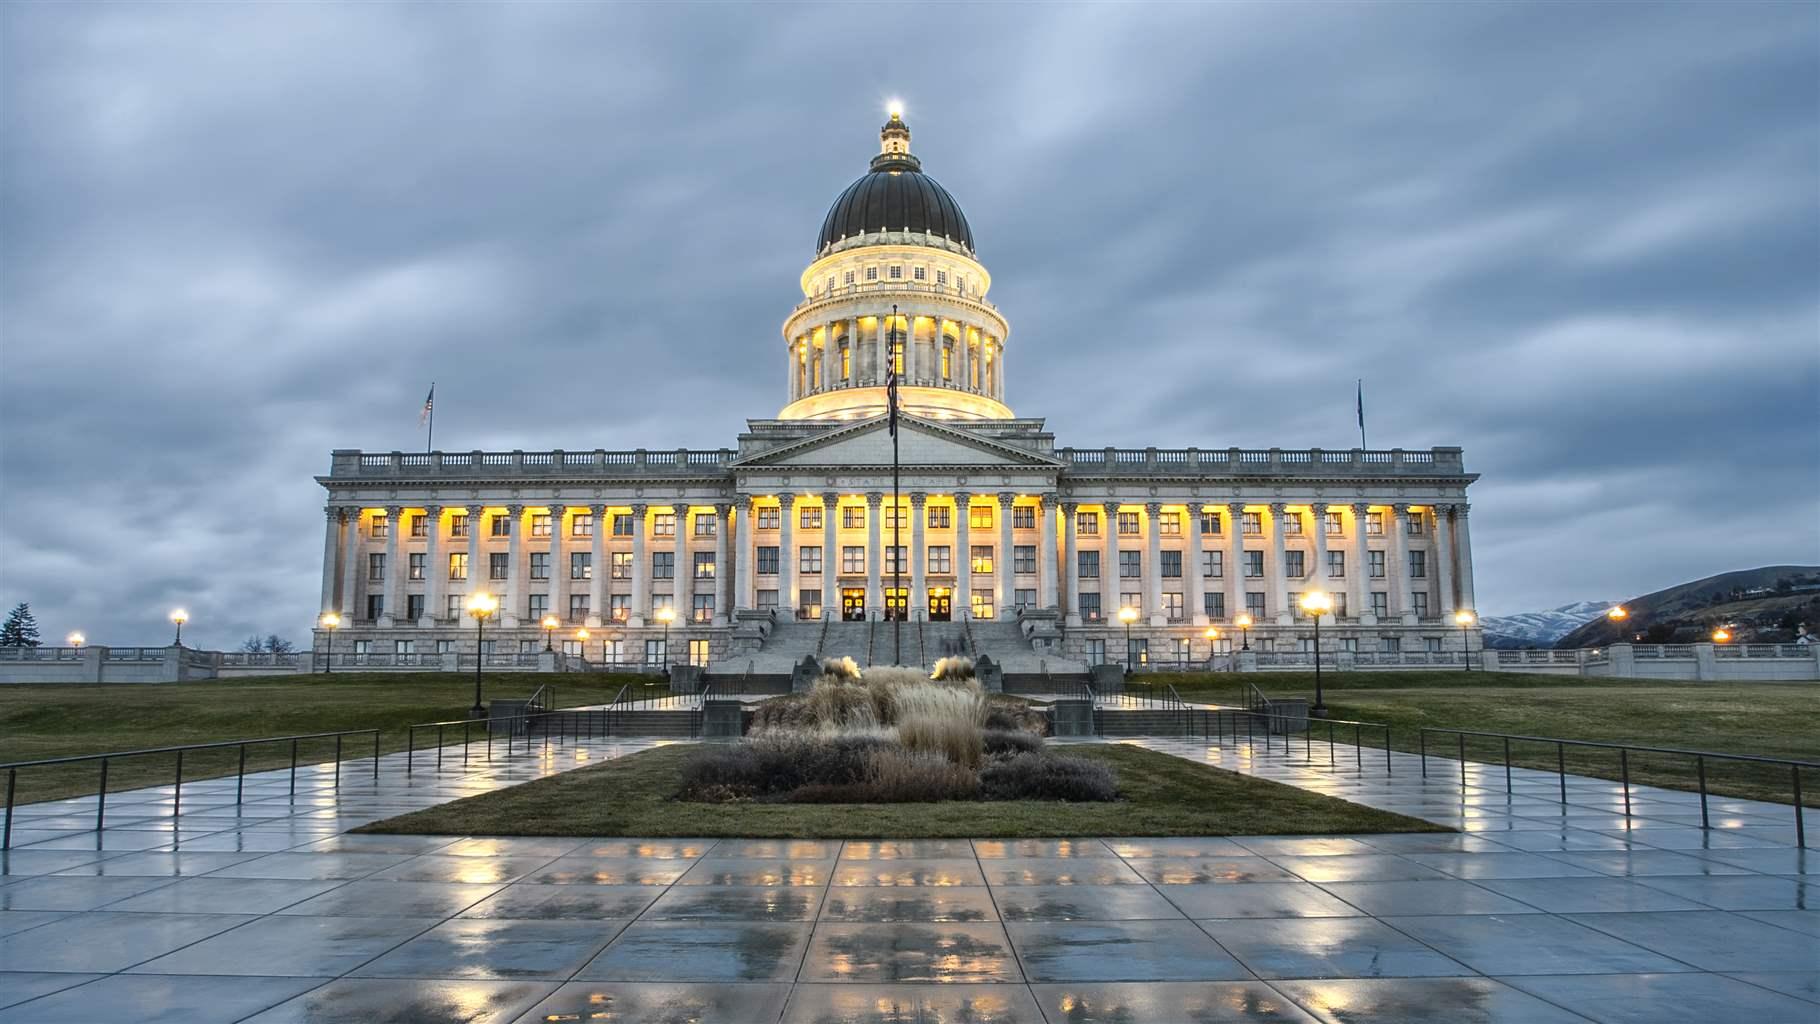 East side of the Utah state capitol building late afternoon/early evening in winter.